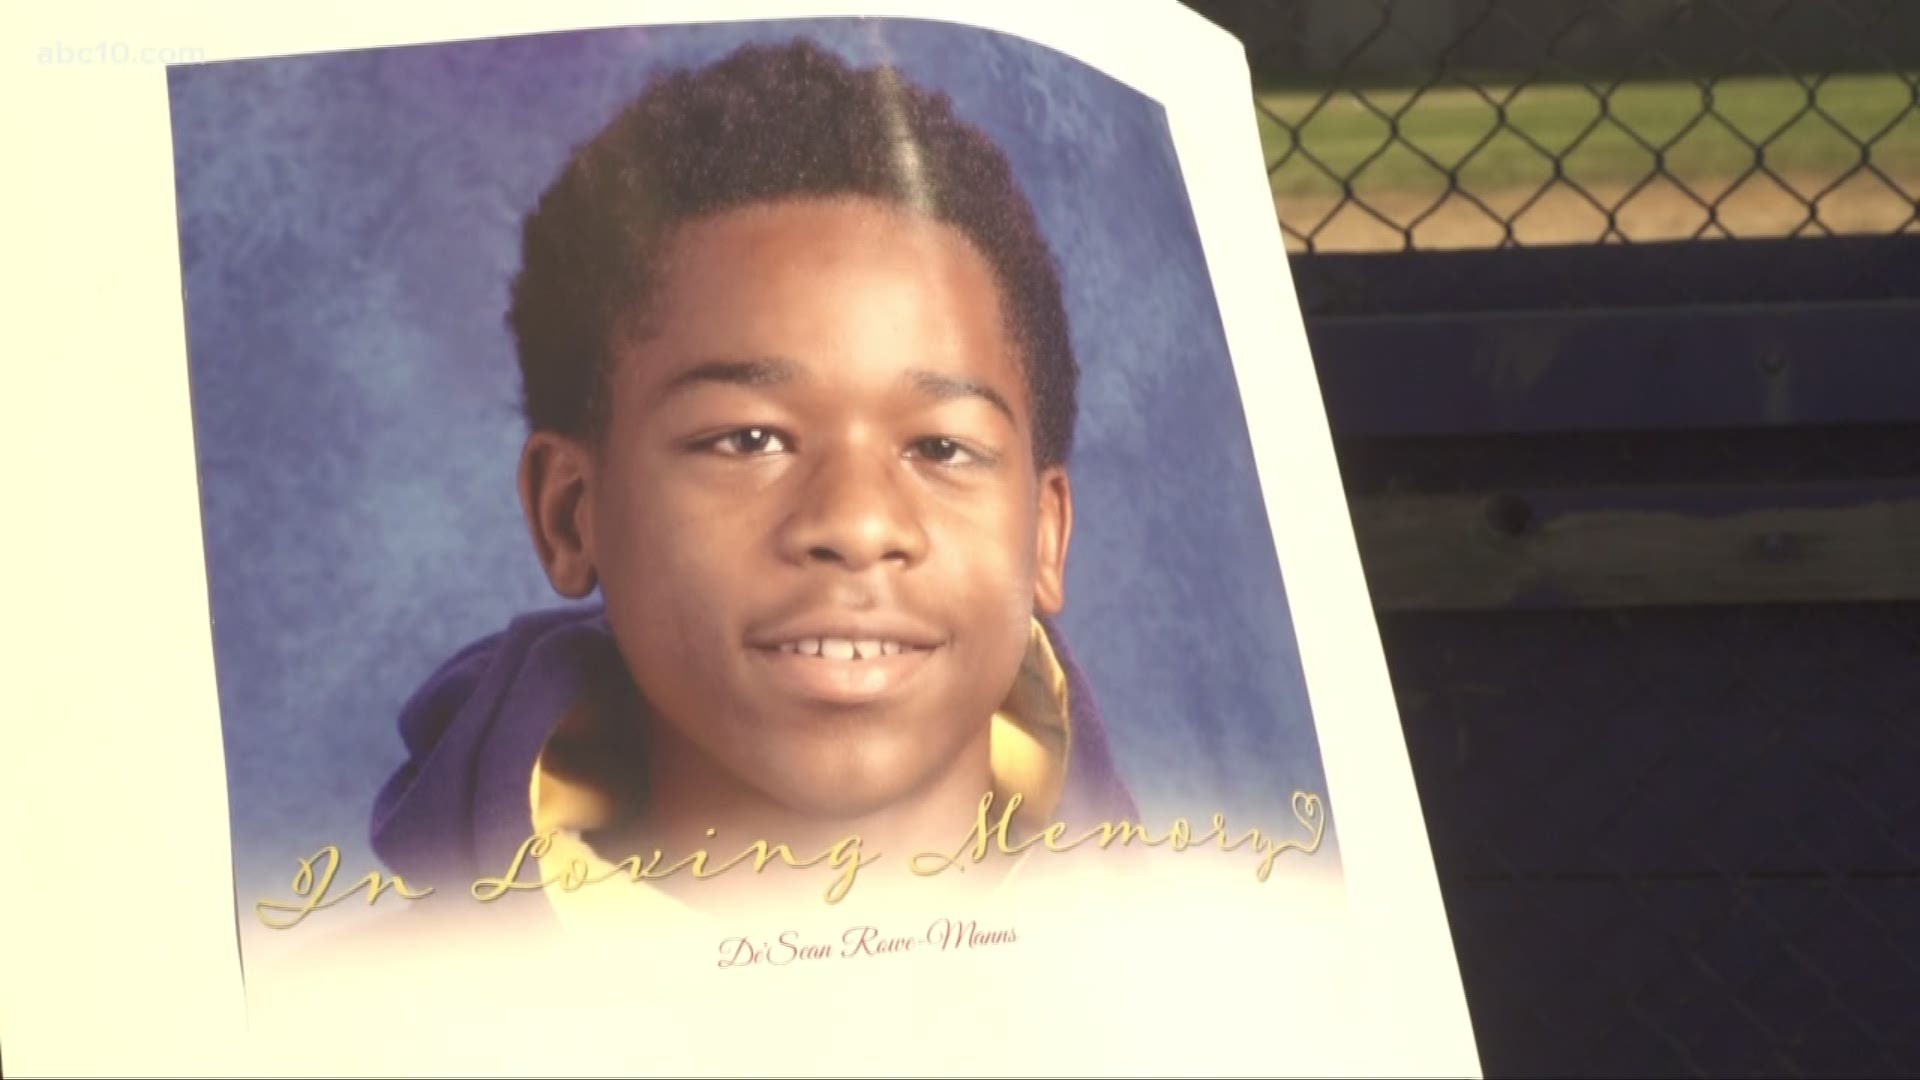 Community members came together to honor and seek justice for the family of 14-year-old De'Sean Rowe-Manns, who was killed in hit-and-run in Sacramento.